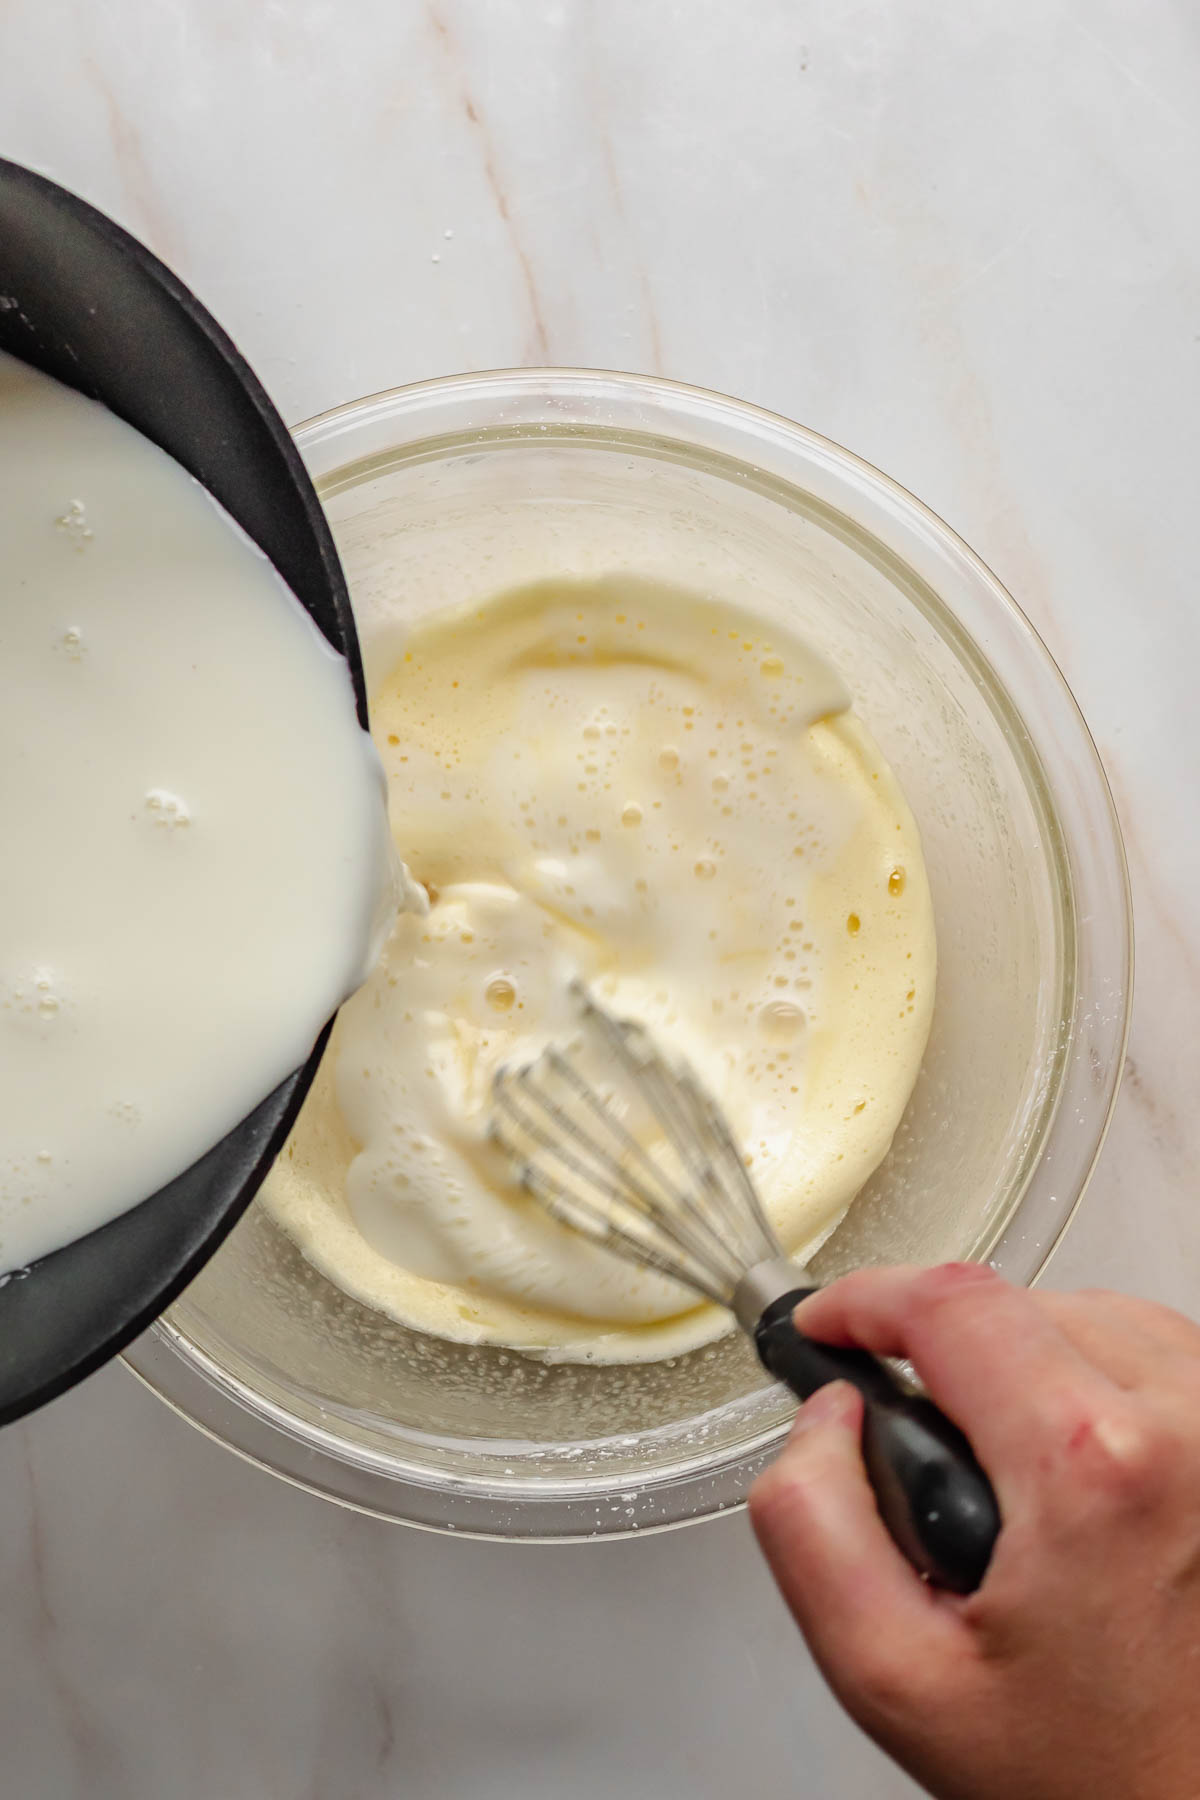 Pouring hot cream into egg yolks while whisking.